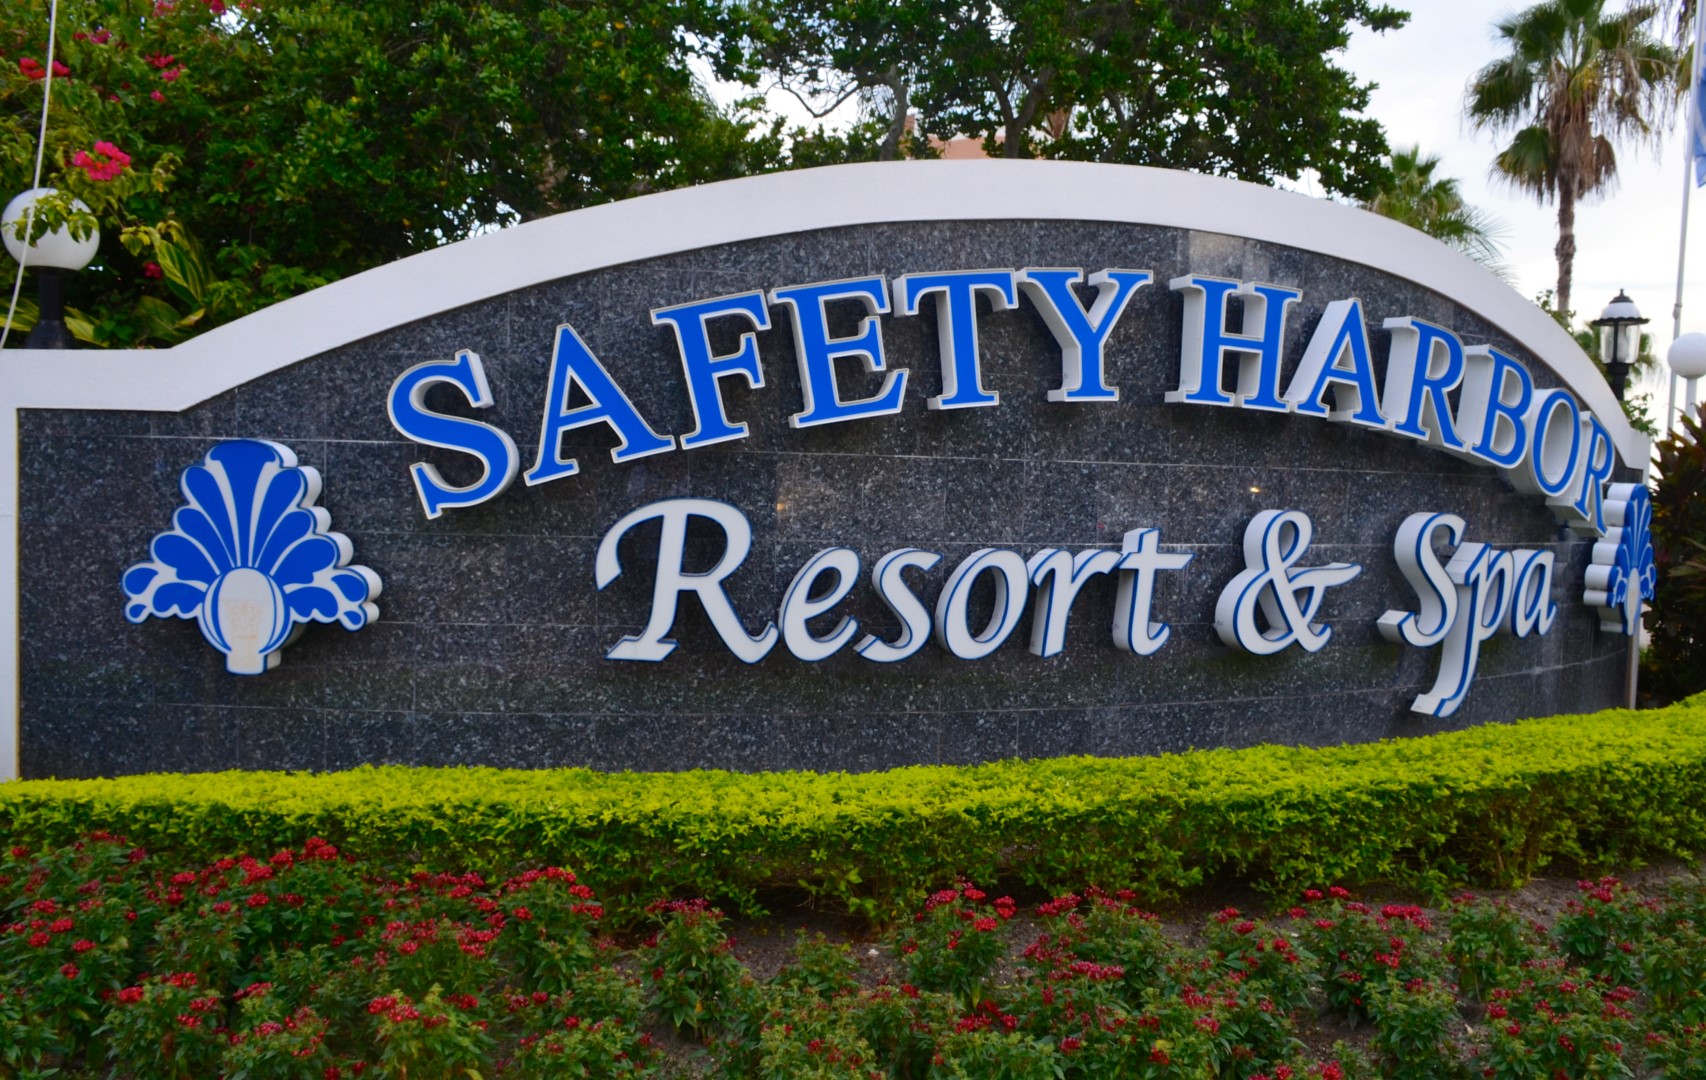 Safety-Harbor-Resort-and-Spa-Large.jpg